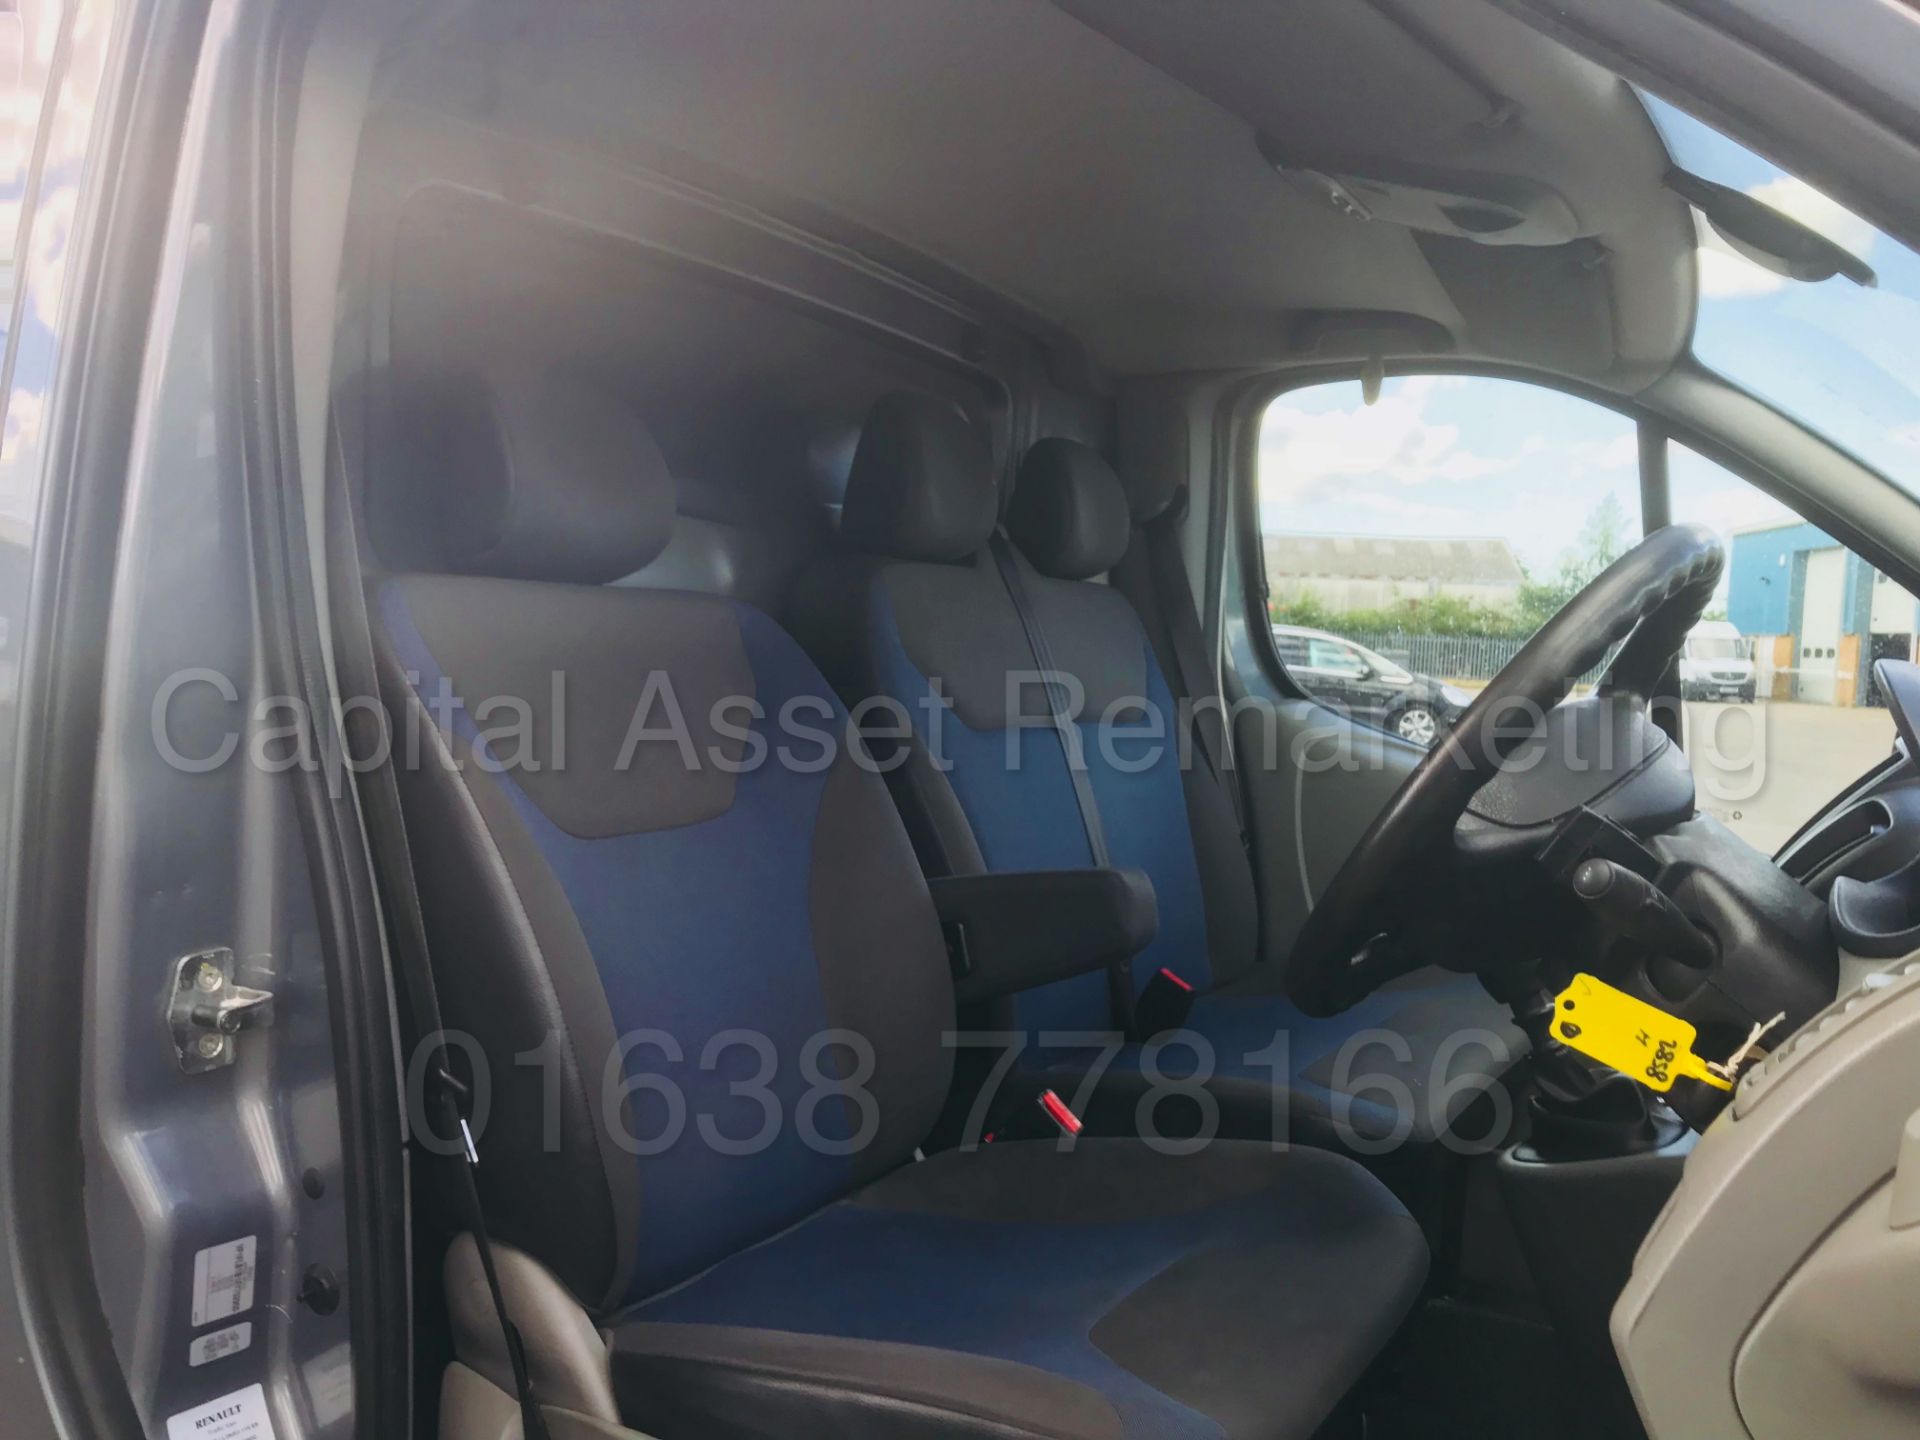 (On Sale) RENAULT TRAFIC 'SPORT EDITION' LWB (2014) '2.0 DCI - 115 BHP - 6 SPEED' *AIR CON* (NO VAT) - Image 35 of 40